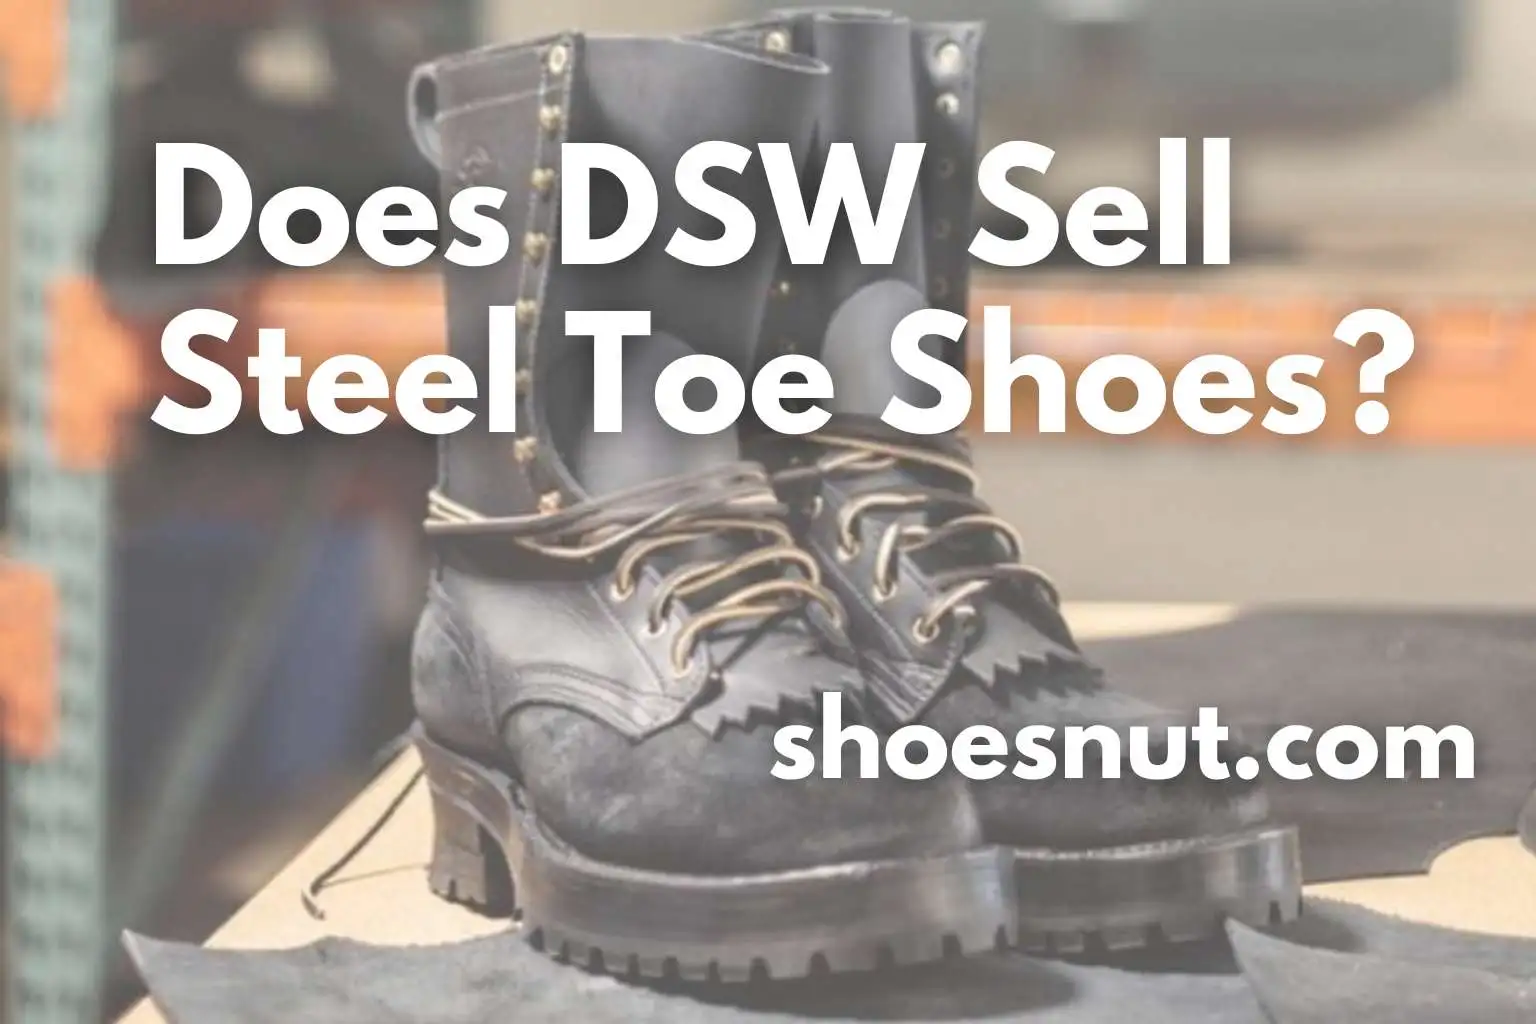 Does DSW Sell Steel Toe Shoes?